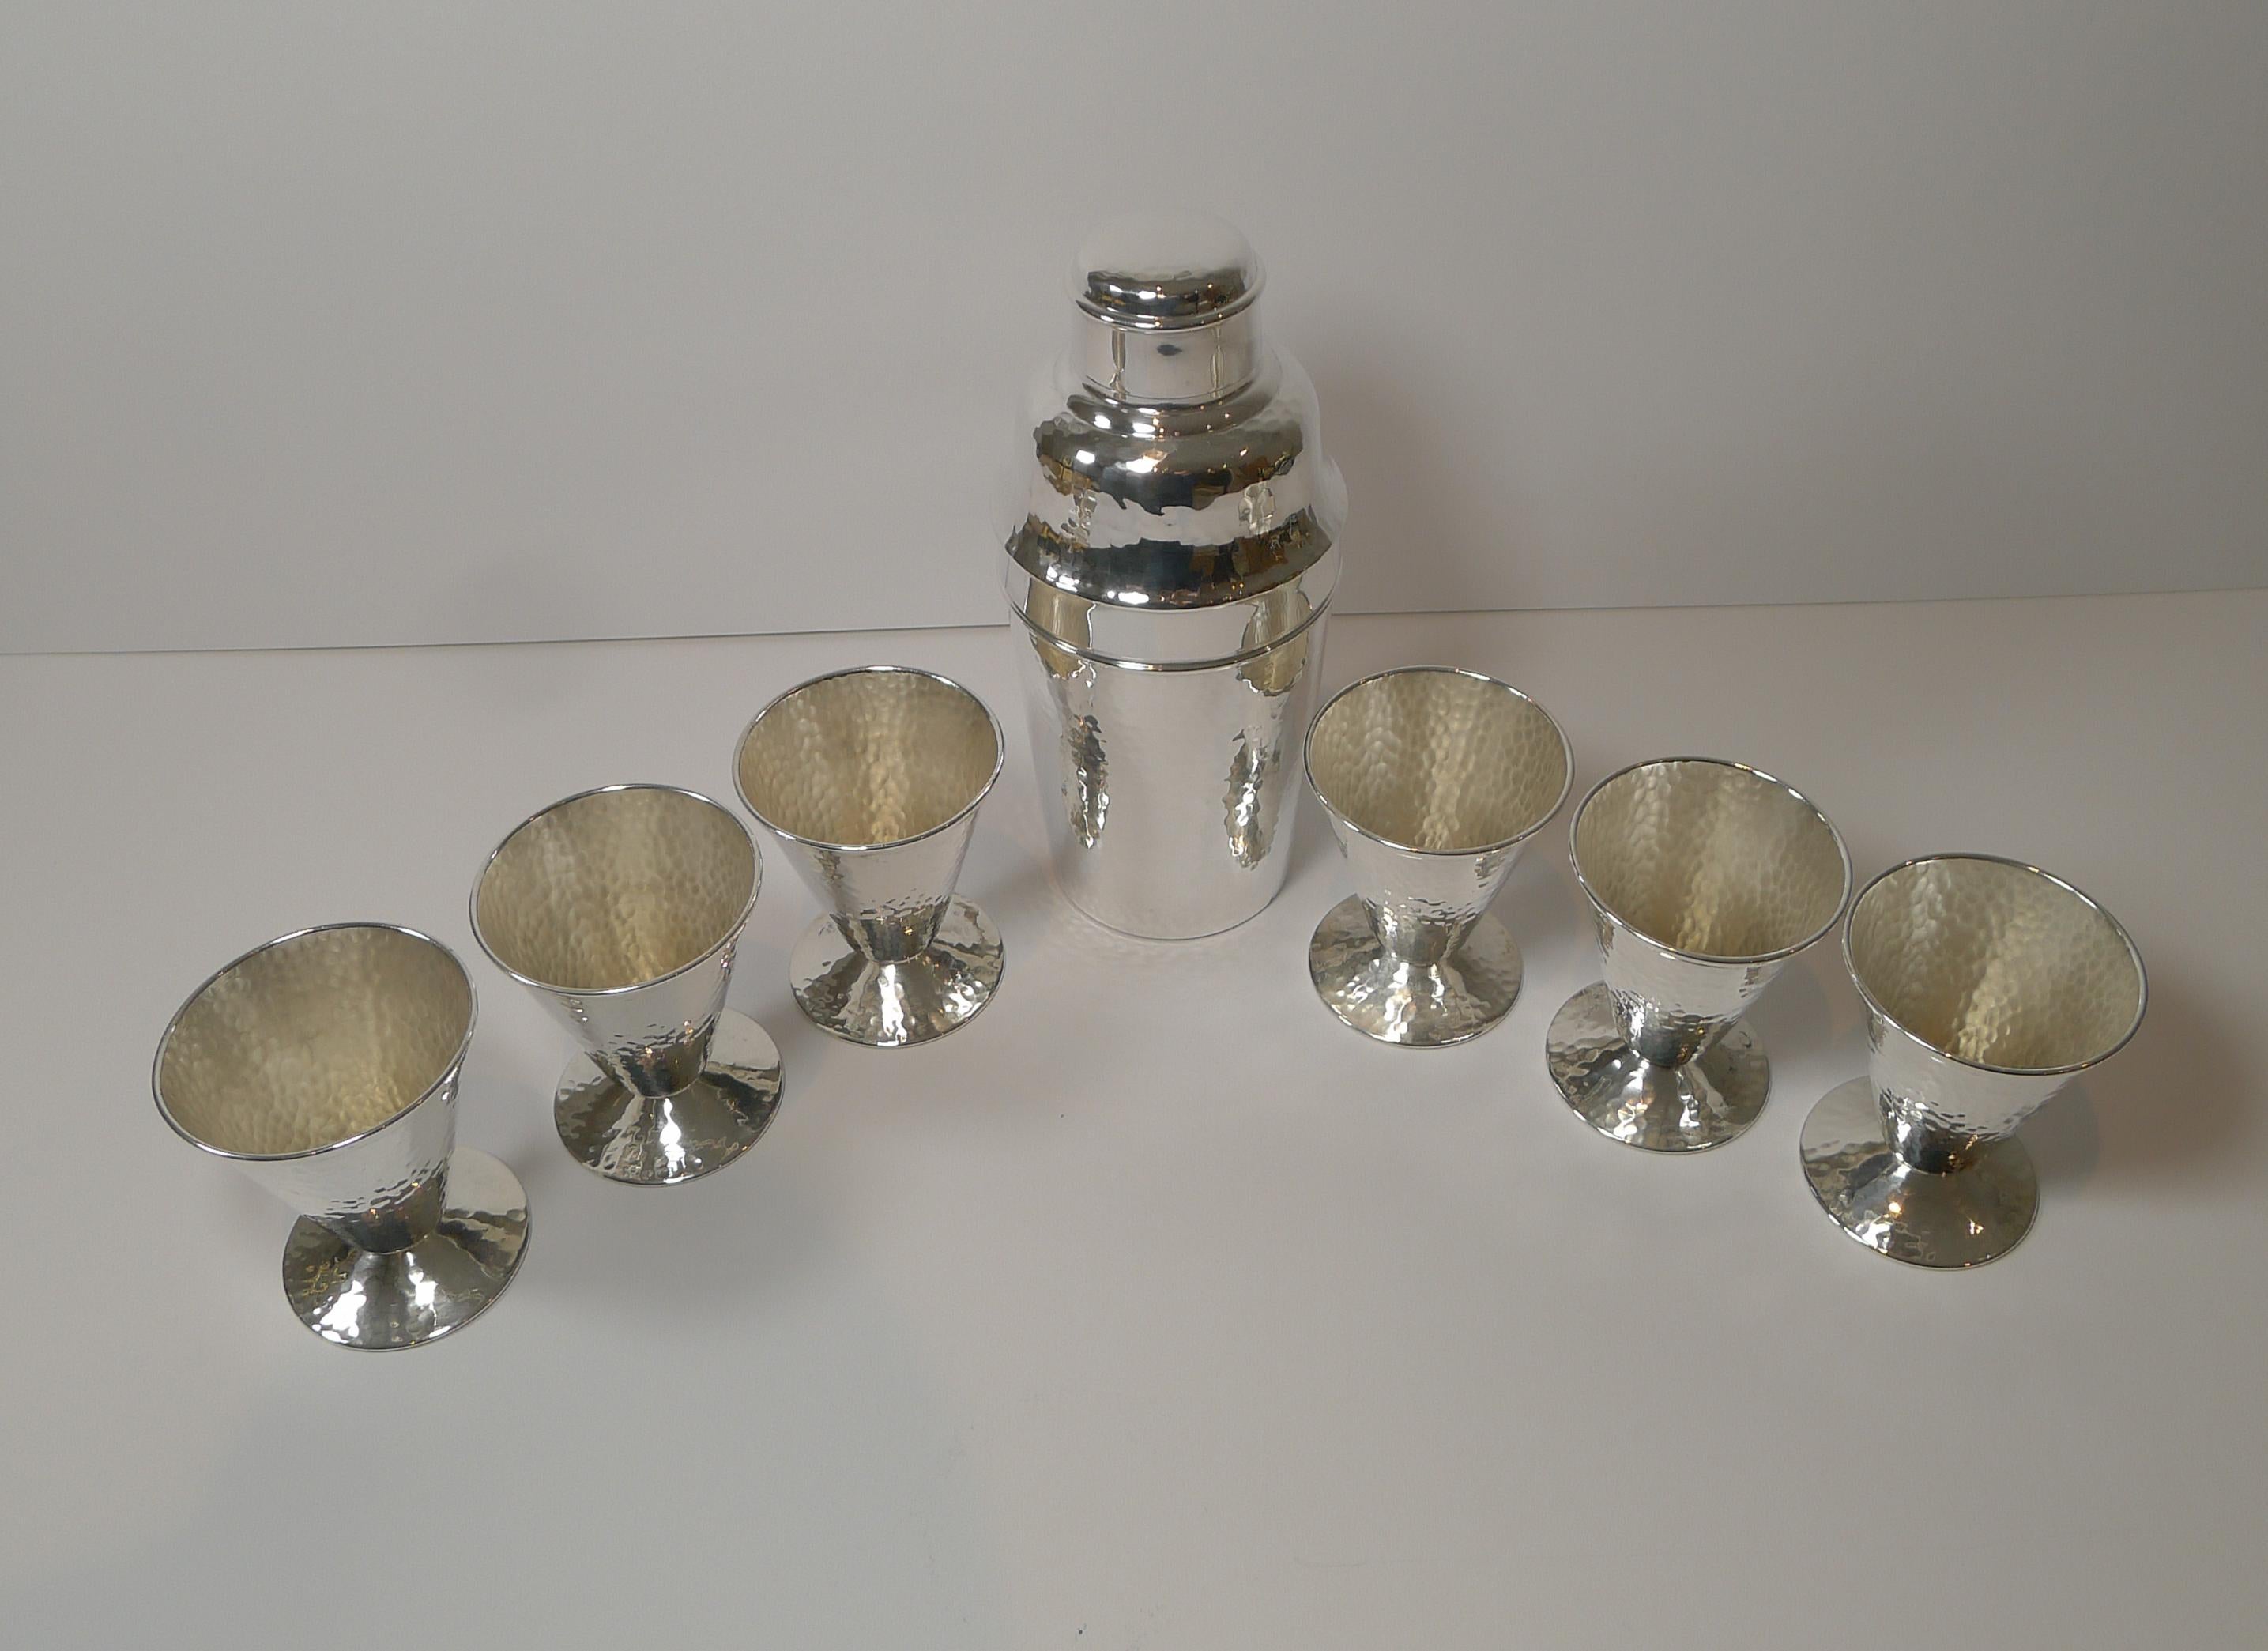 A magnificent cocktail set which came to us as a set but started life on two different sides of the Atlantic; New York meets London!

The cocktail shaker was made by the top-notch silversmith, Mappin and Webb of London and the conical shaped